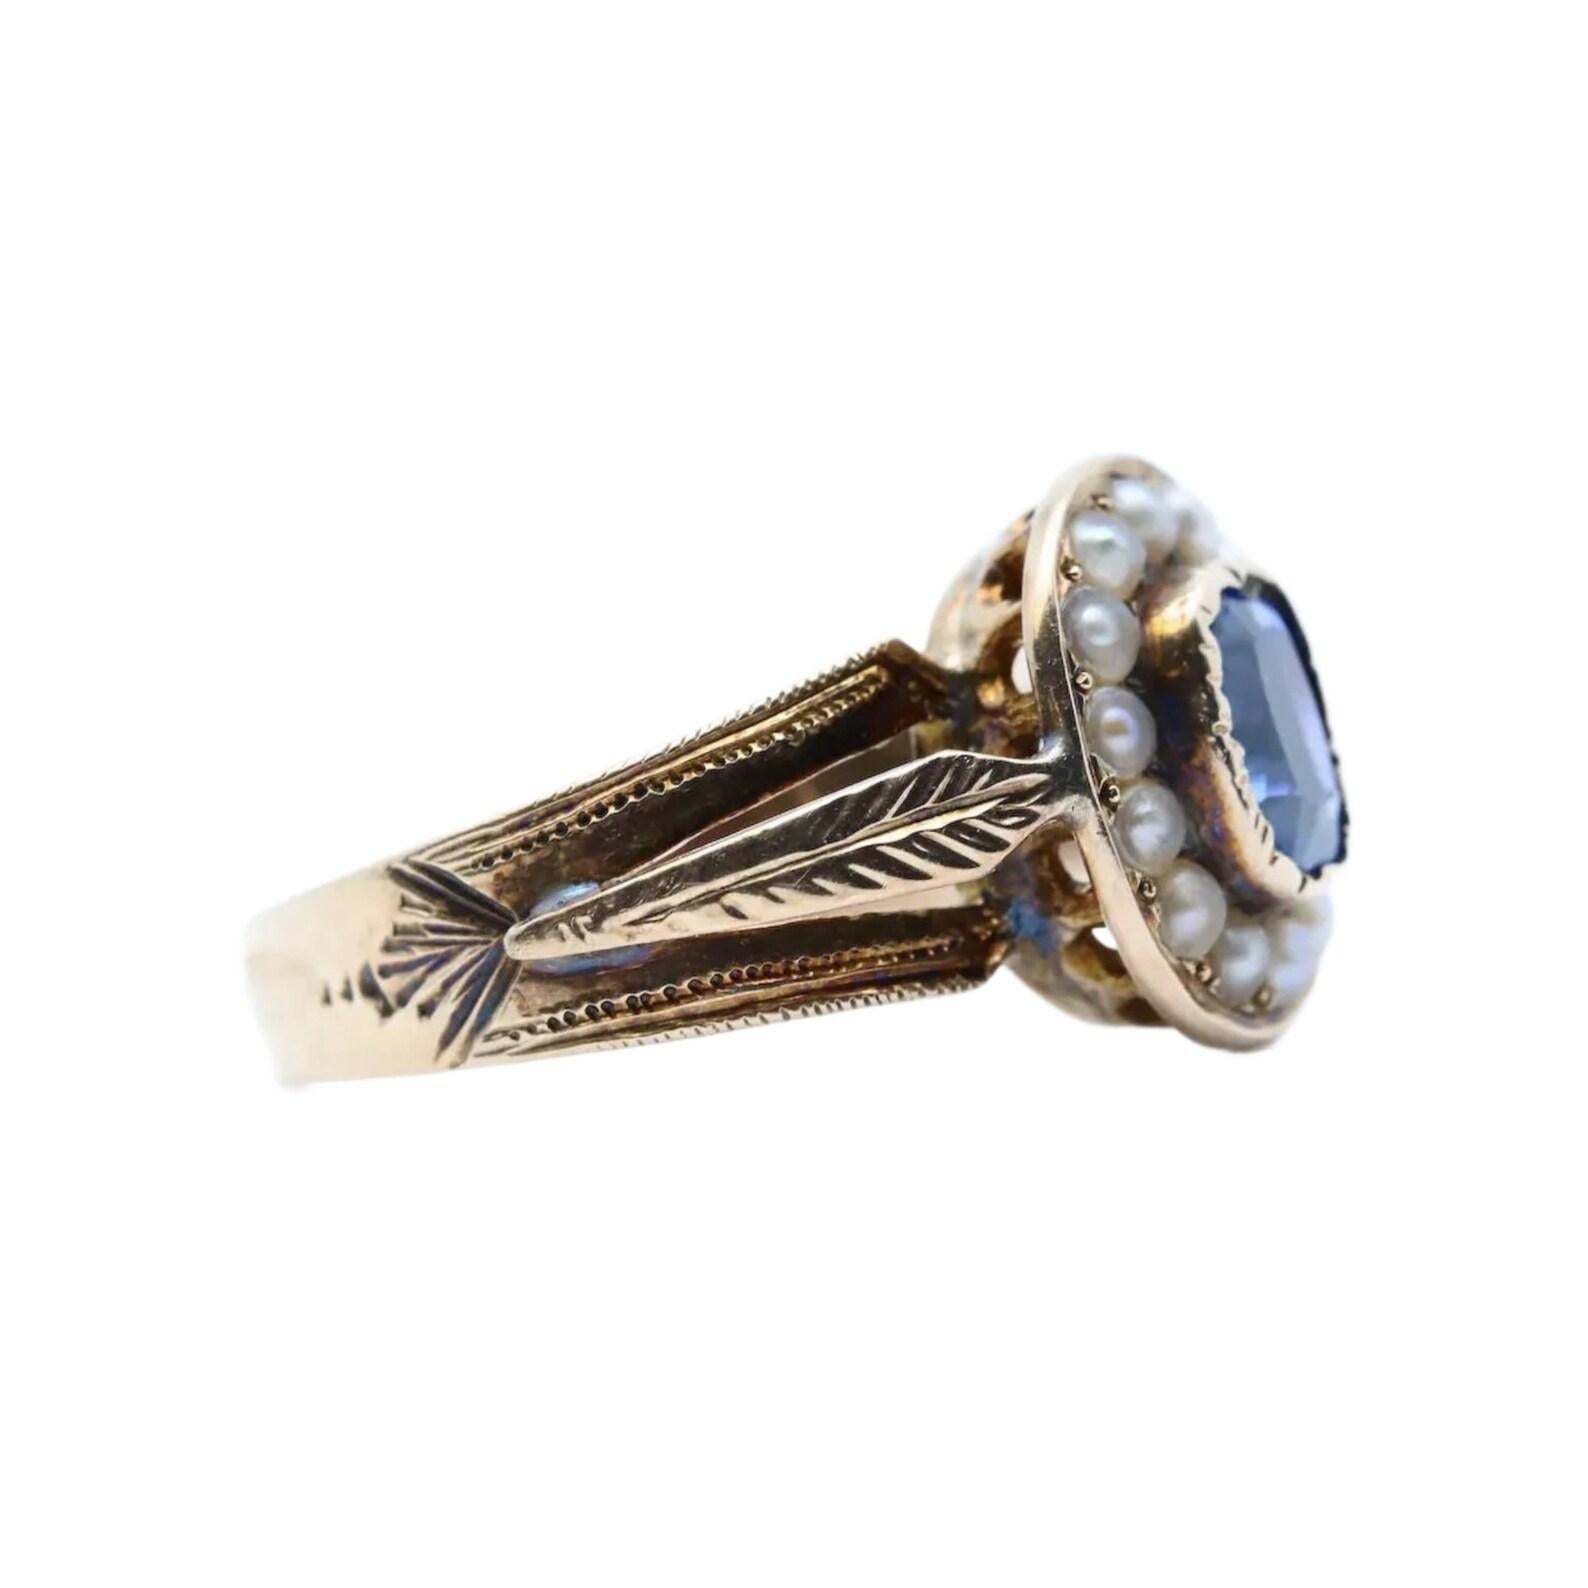 An early victorian period blue Iolite and natural split pearl ring in 14 karat yellow gold. Centered by a 1.00 carat vivid blue natural Iolite which often mistaken for blue sapphire. Surrounding the bezel set Iolite are 14 natural split pearls